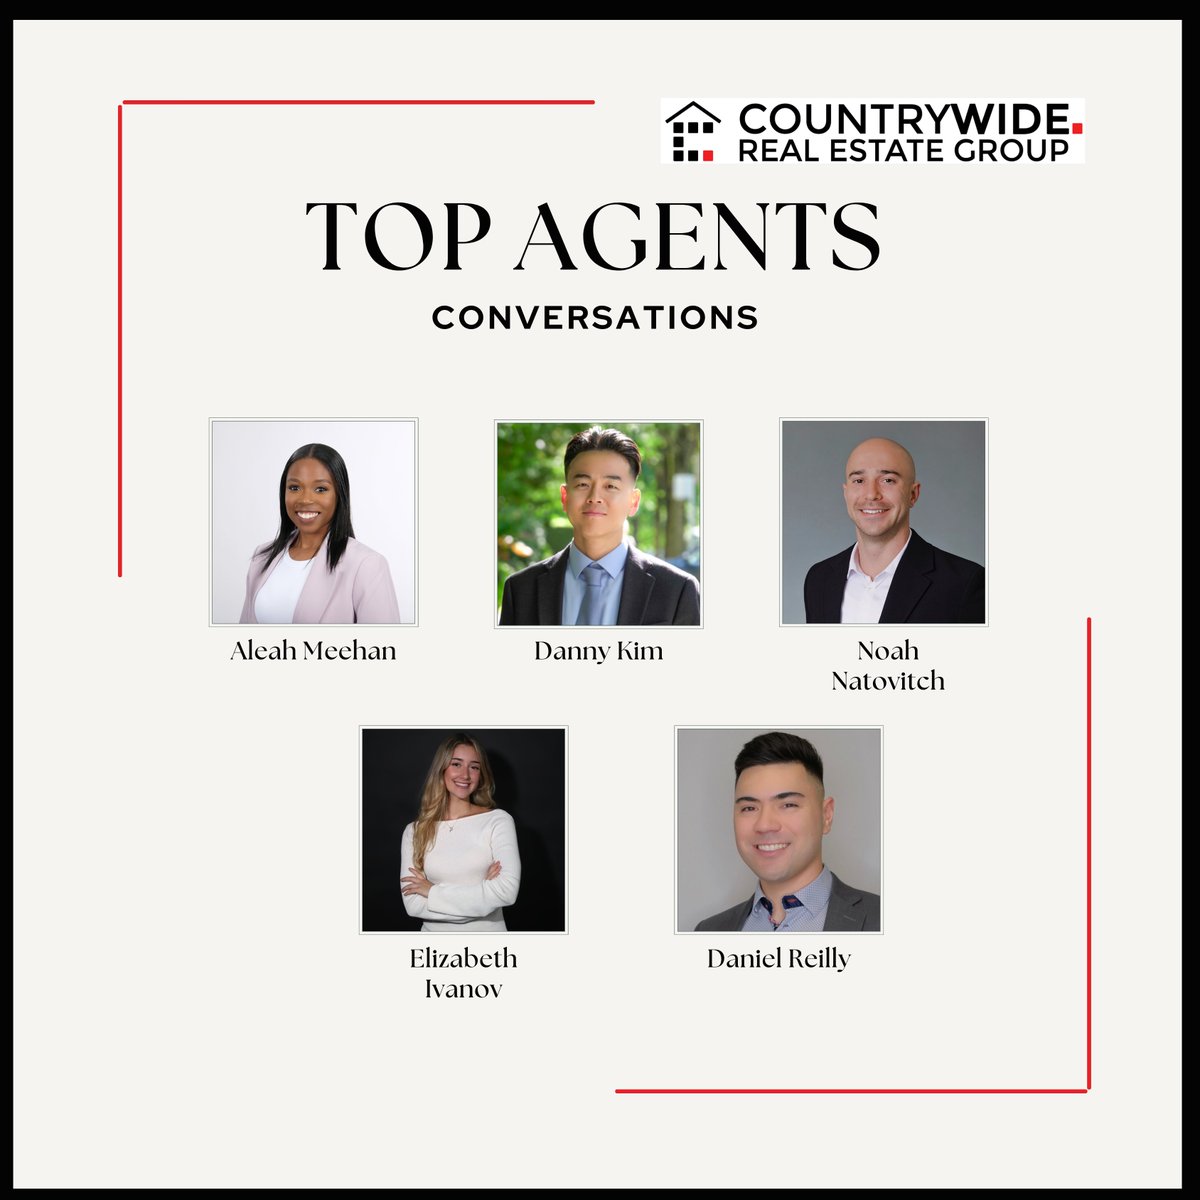 Our Top Agents are leading the way this week with the most conversations! 🌟 Their dedication to excellent communication is unparalleled. Keep up the great work, team! Let's continue to engage with our clients and provide top-notch service! 💬🚀 #TopAgents #RealEstateExcellence